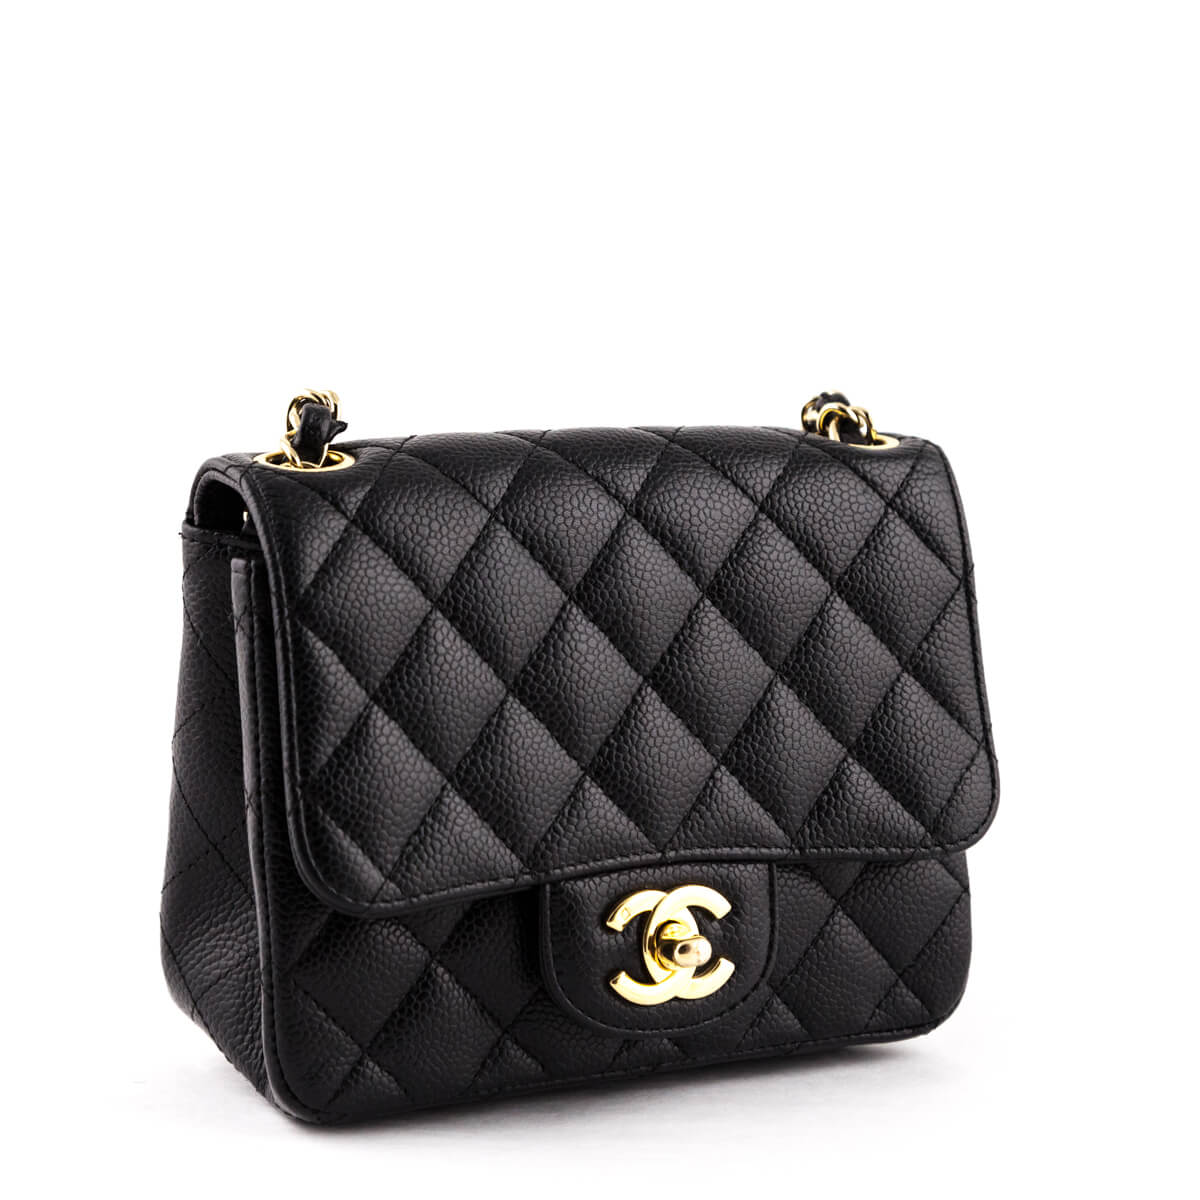 Chanel Black Quilted Caviar Mini Square Flap Bag - Preowned Chanel